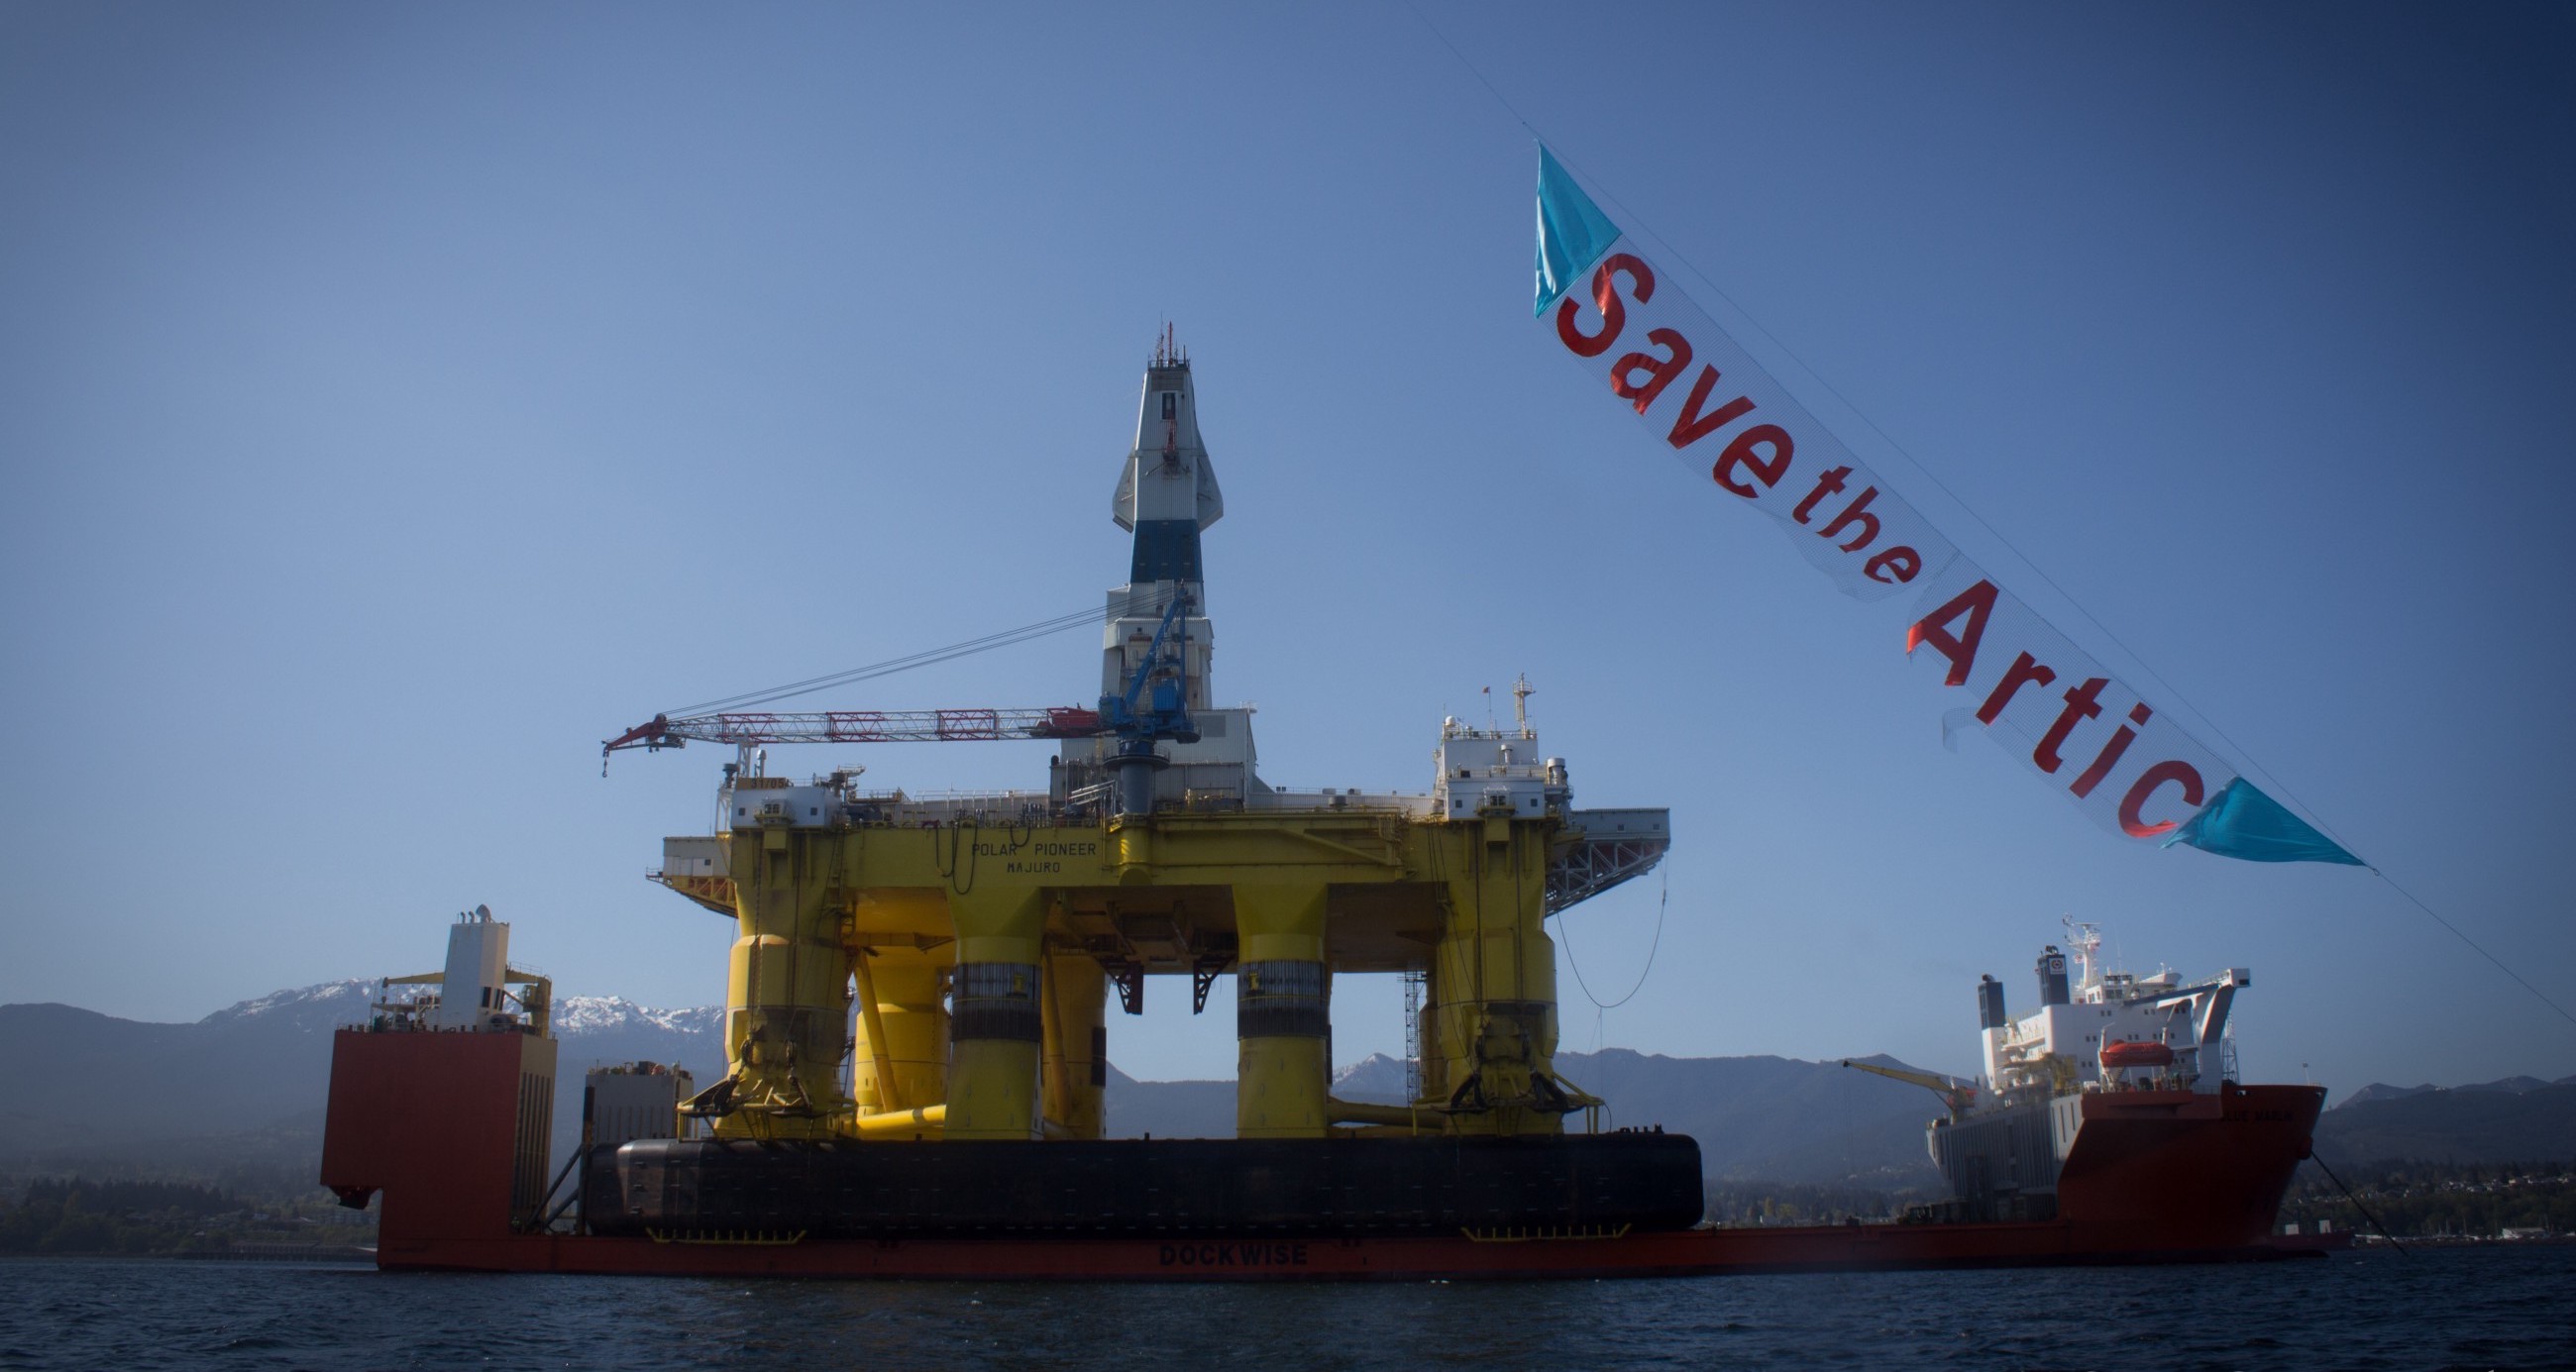 An oil platform sits on a ship, awaiting its voyage out to sea. Activists fly a "Save the Arctic" banner overhead.